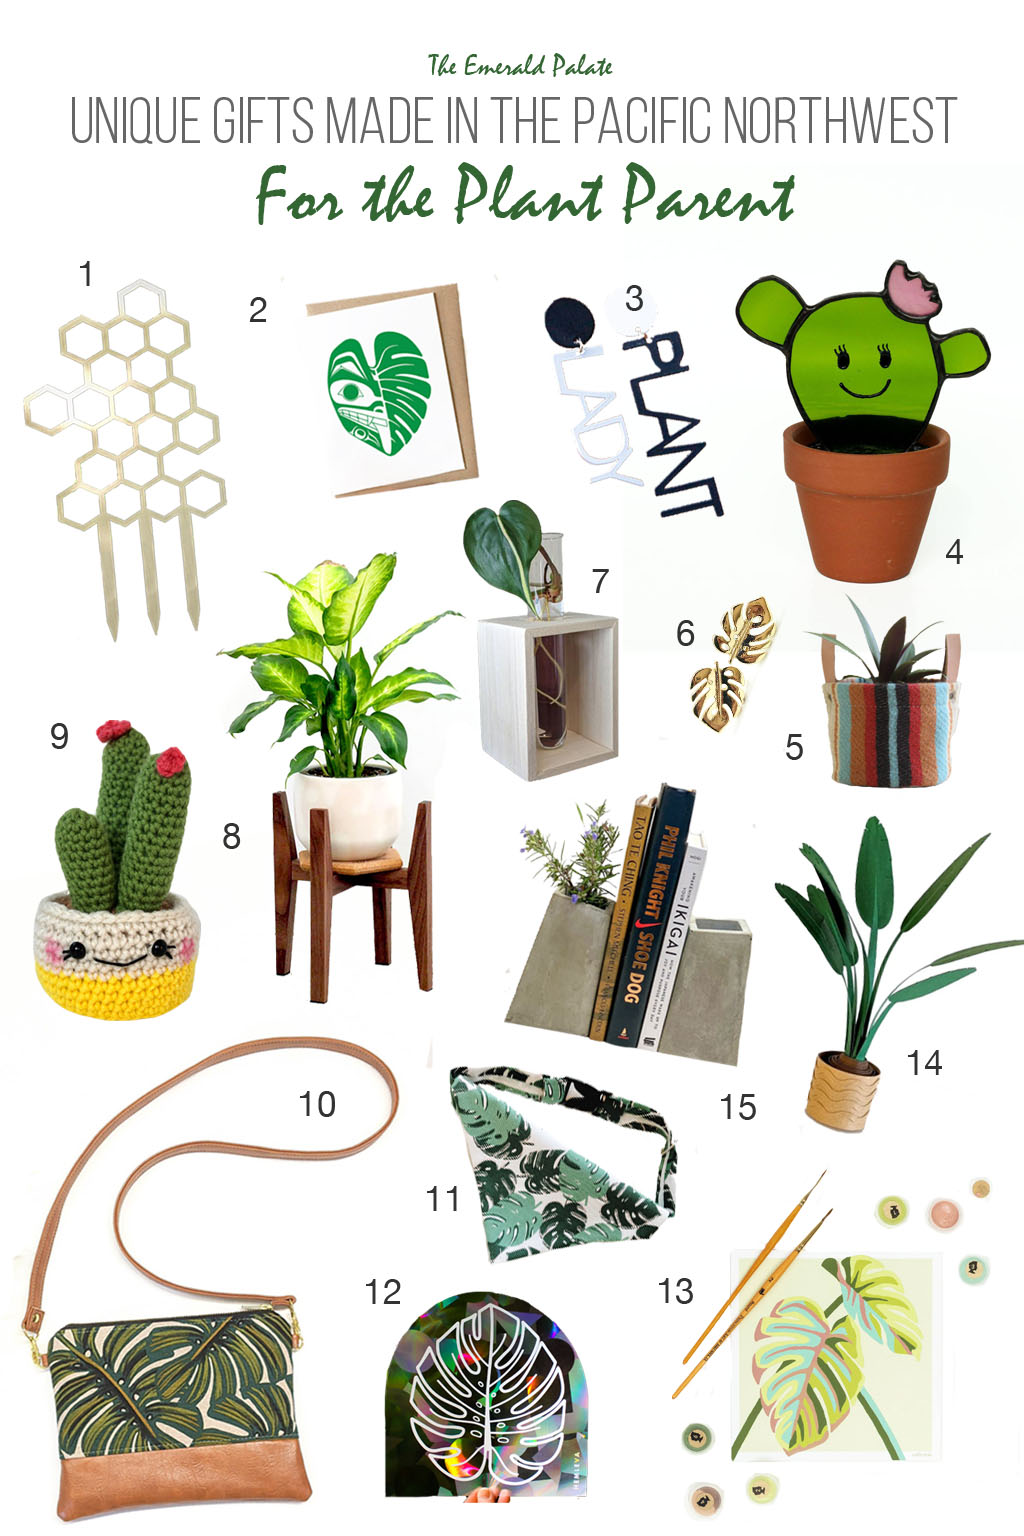 A collection of Pacific Northwest gifts for the plant parent